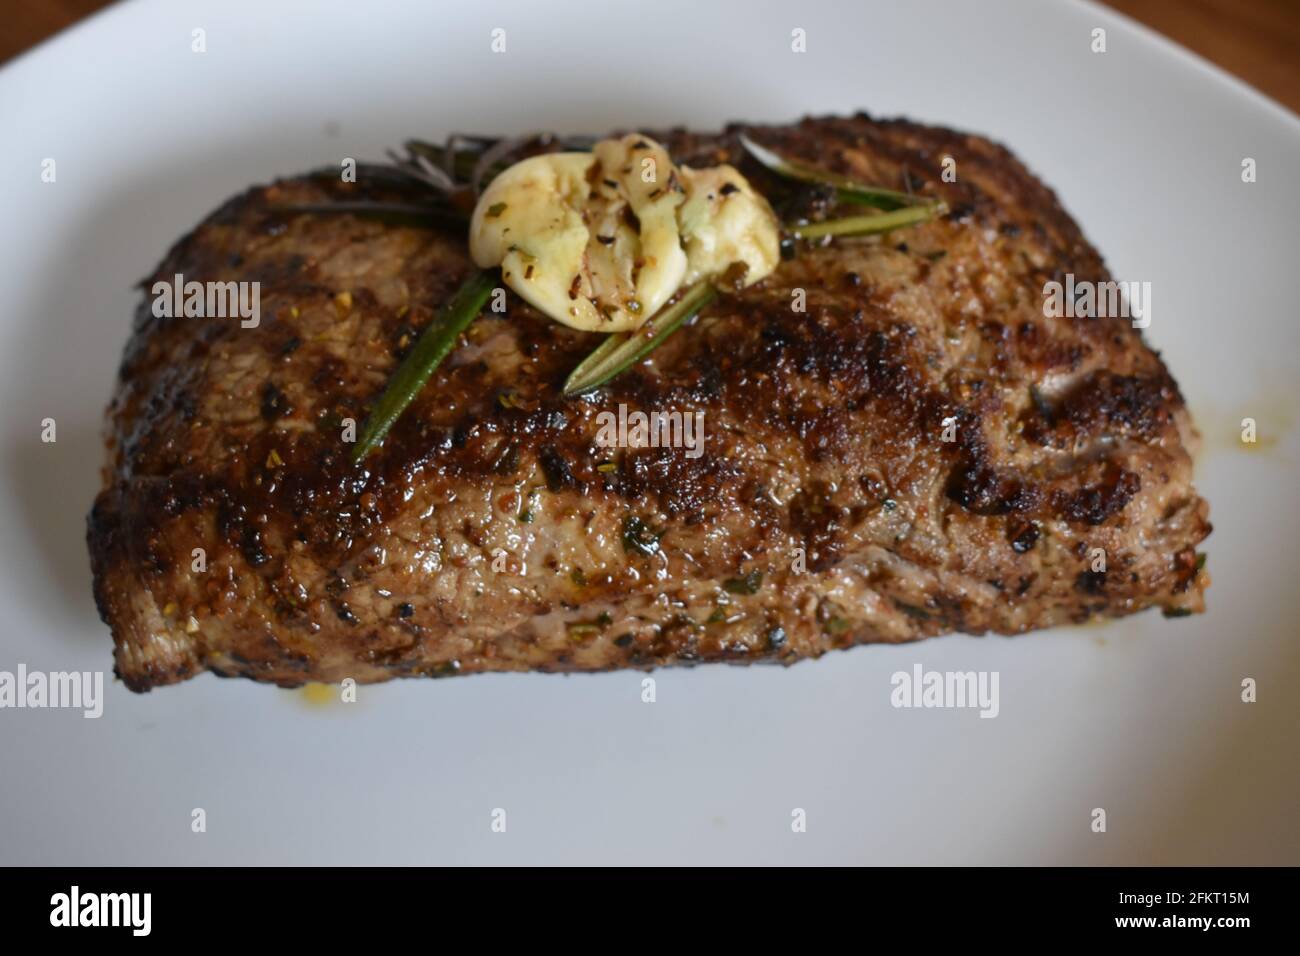 Closeup shot of newly cooked steak topped with herbs on a white plate Stock Photo